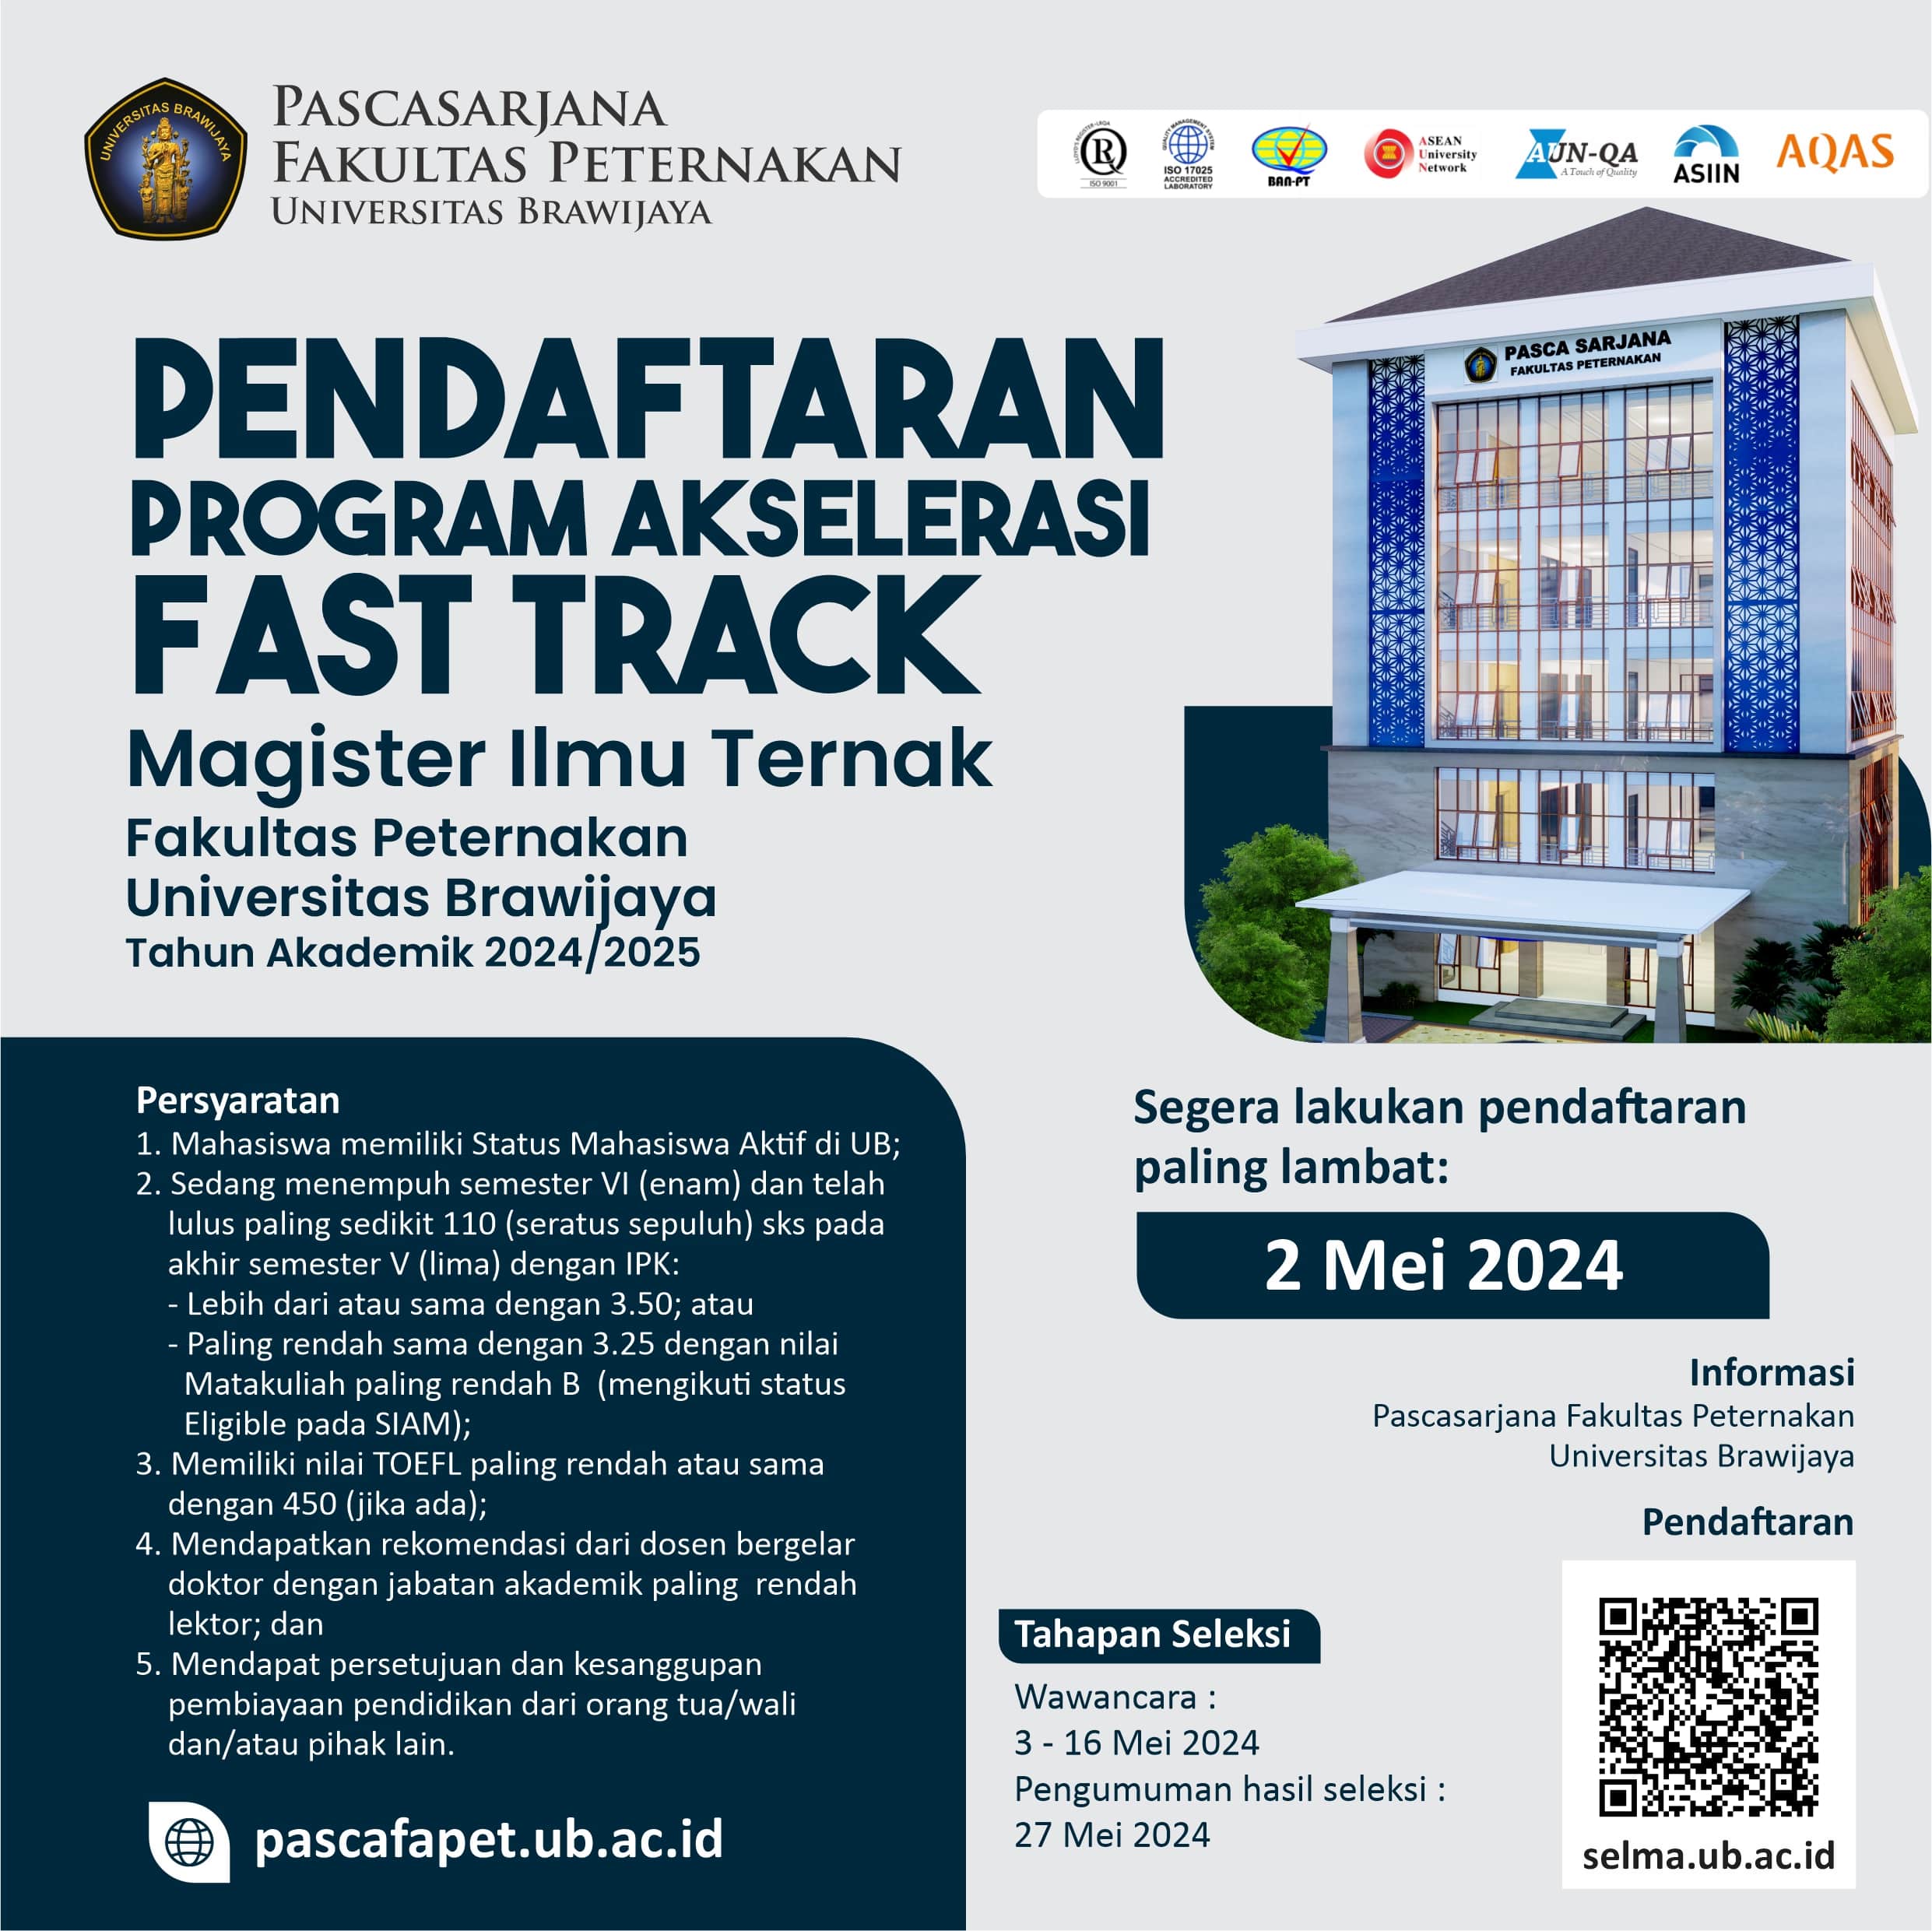 Registration for the Fast Track Master’s Program in Animal Science at the Faculty of Animal Science, UB